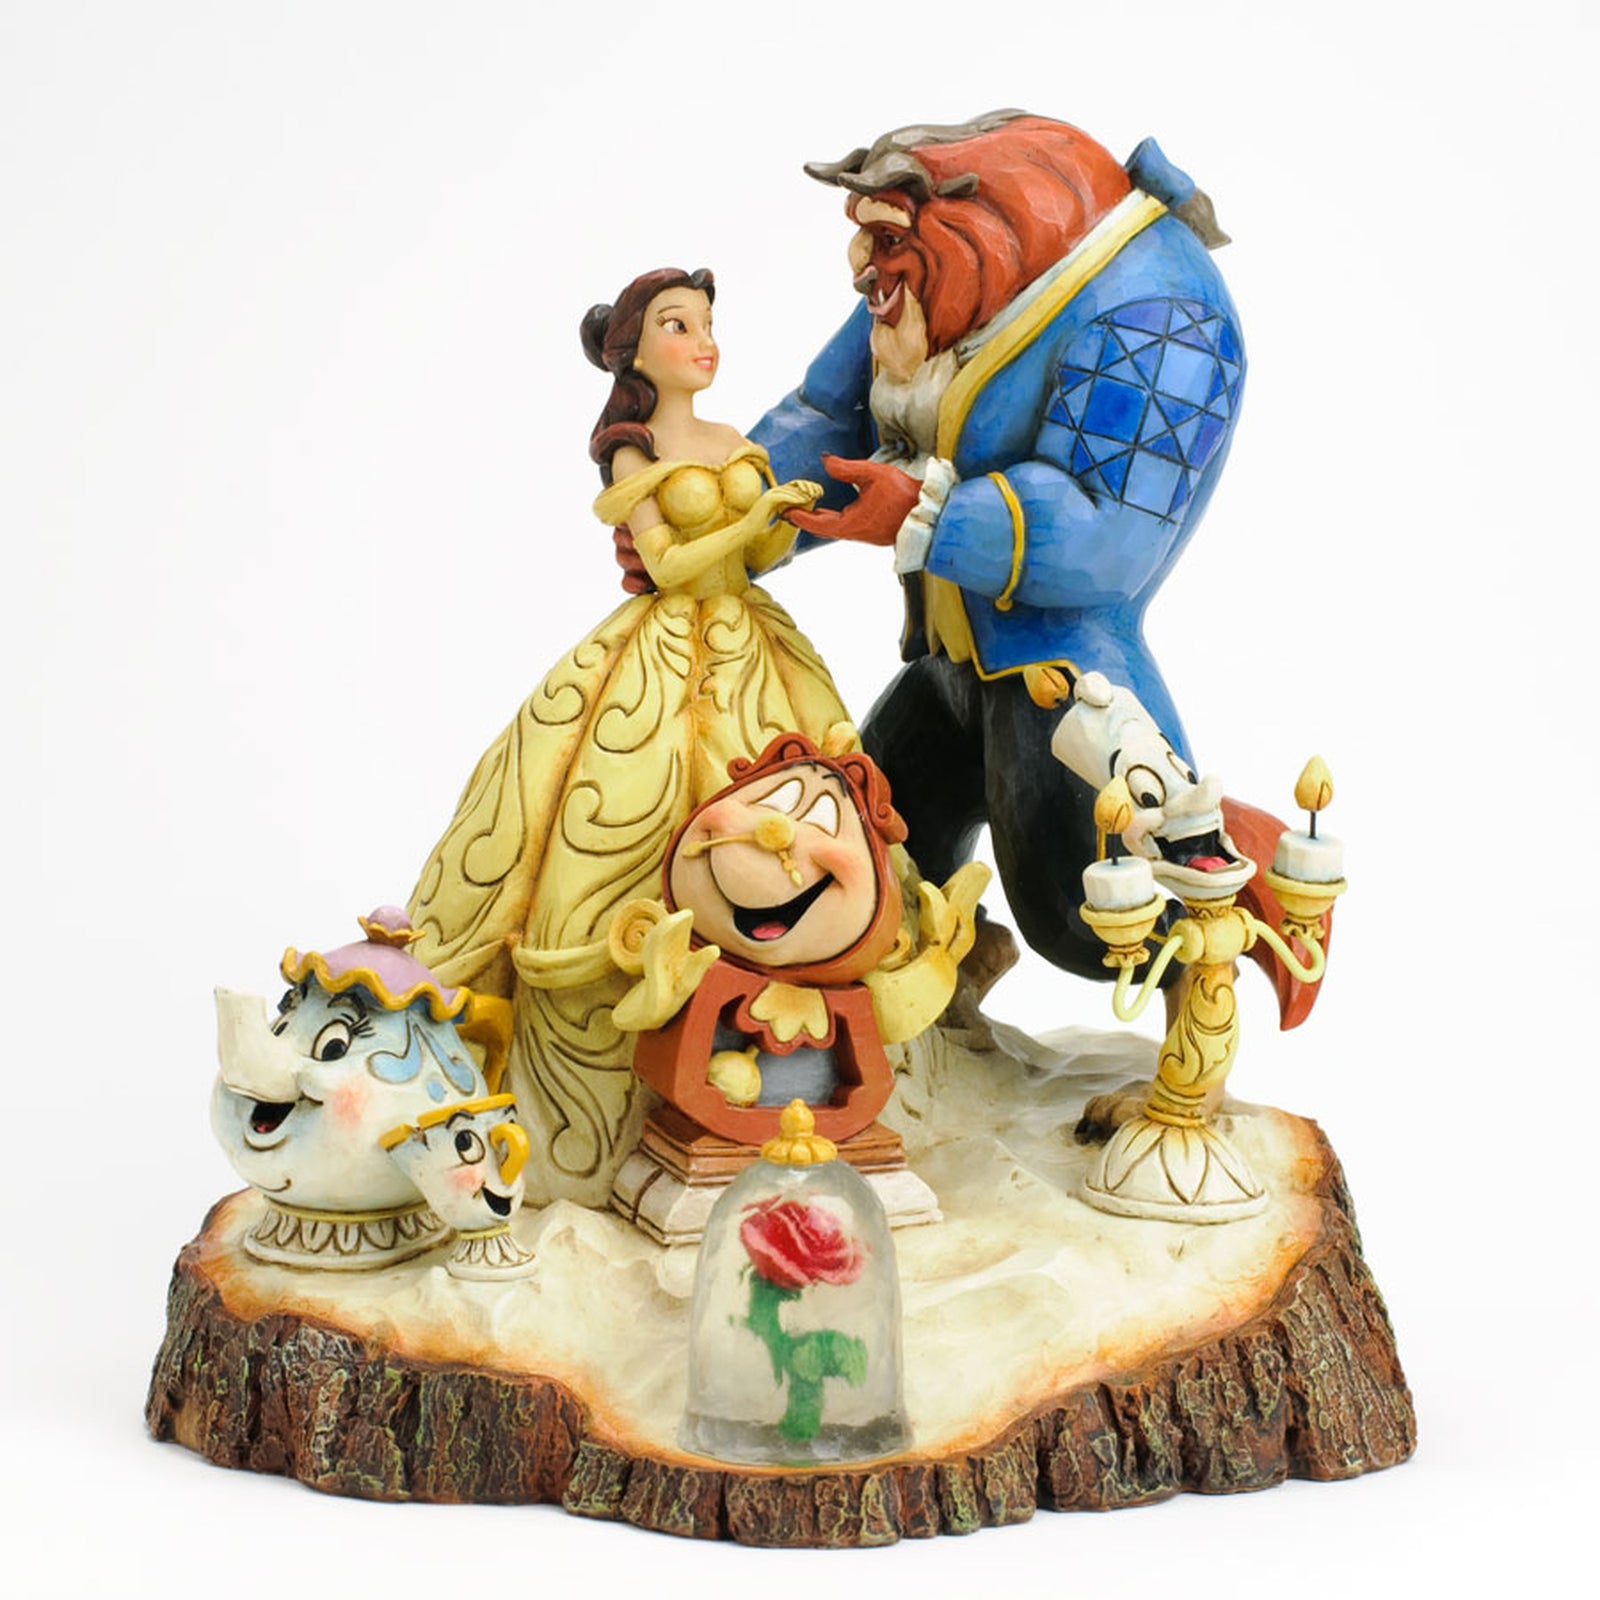 Discover the Beauty of Collectible Figurines